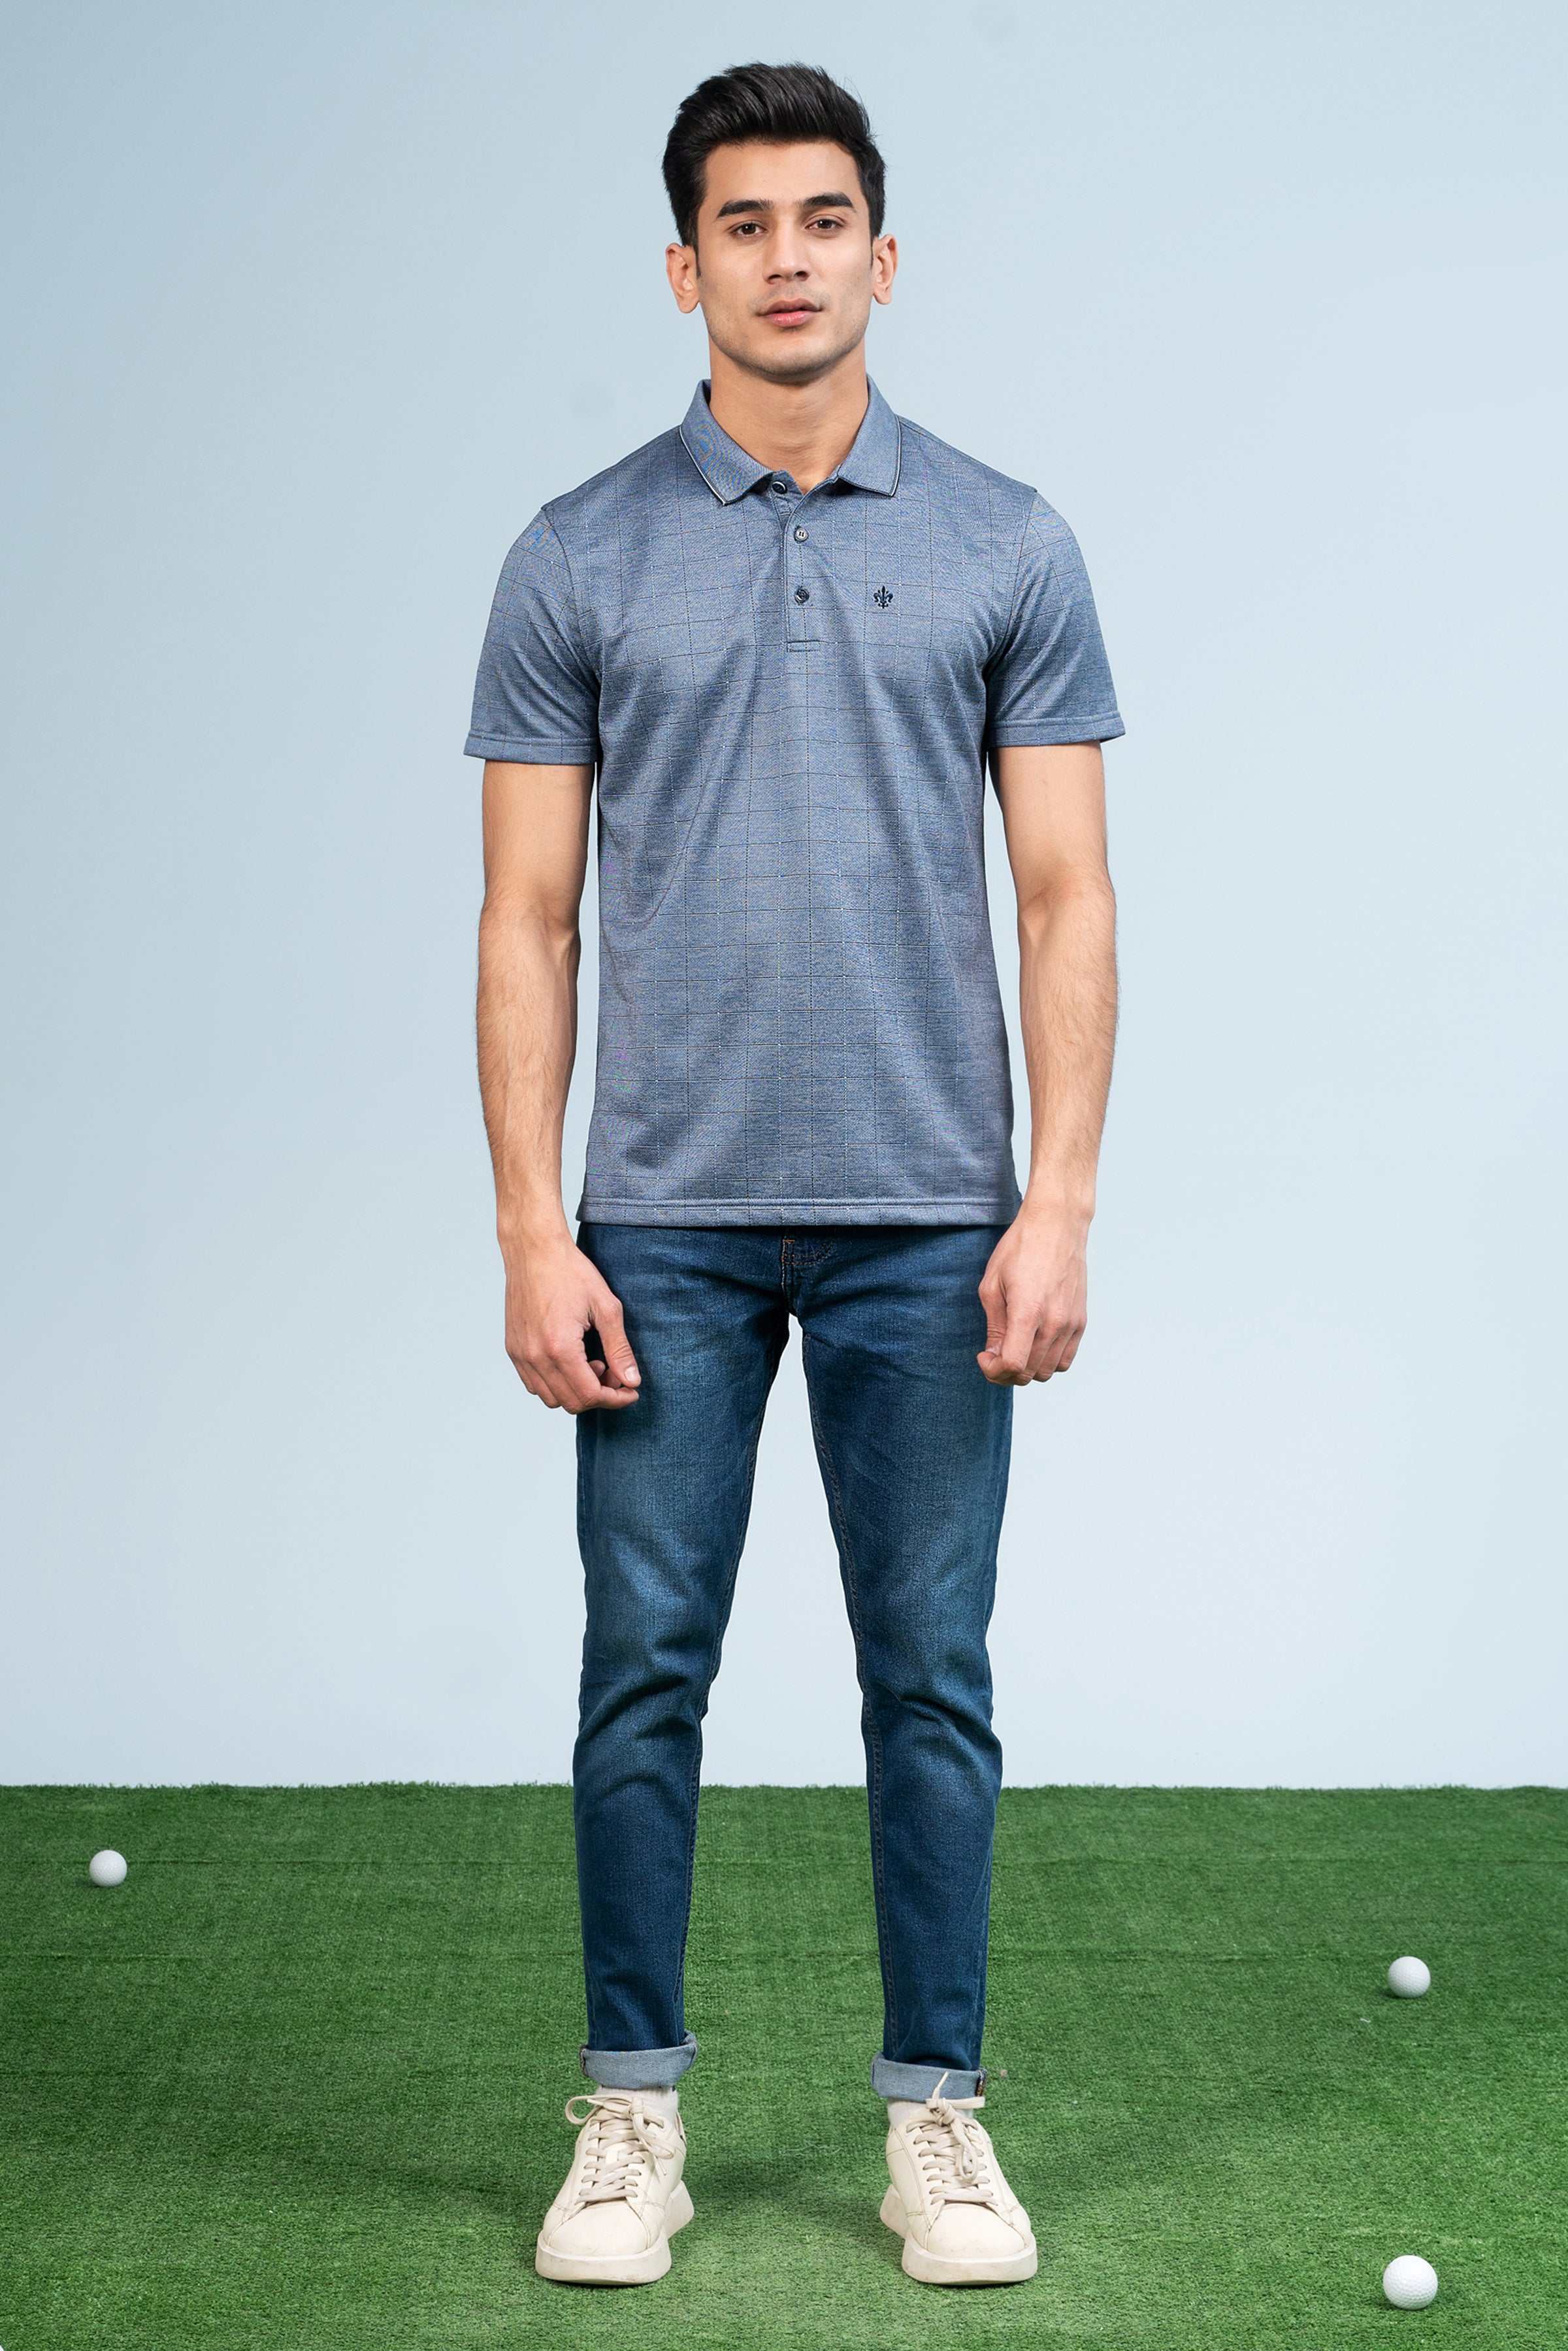 EXECUTIVE ICONIC POLO TEAL BLUE - Charcoal Clothing